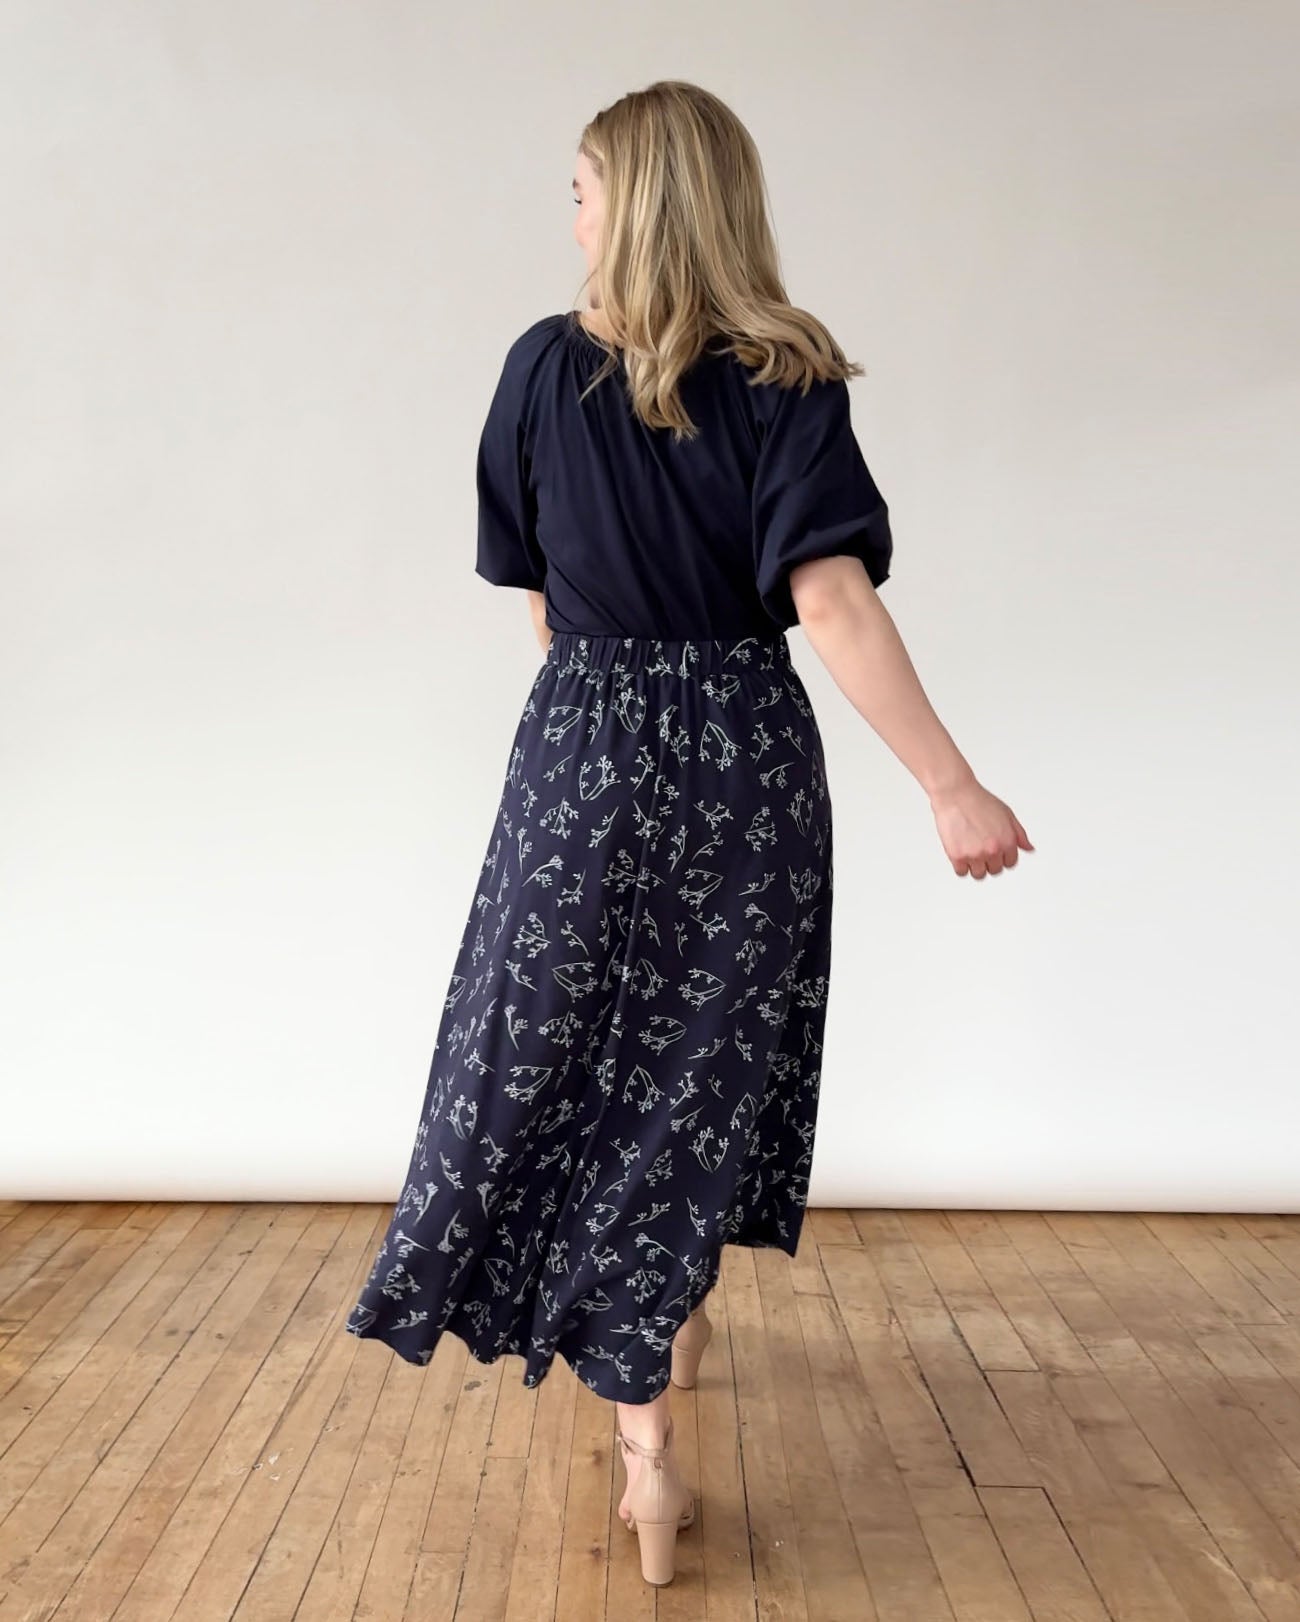 FAWN printed skirt in Navy/White